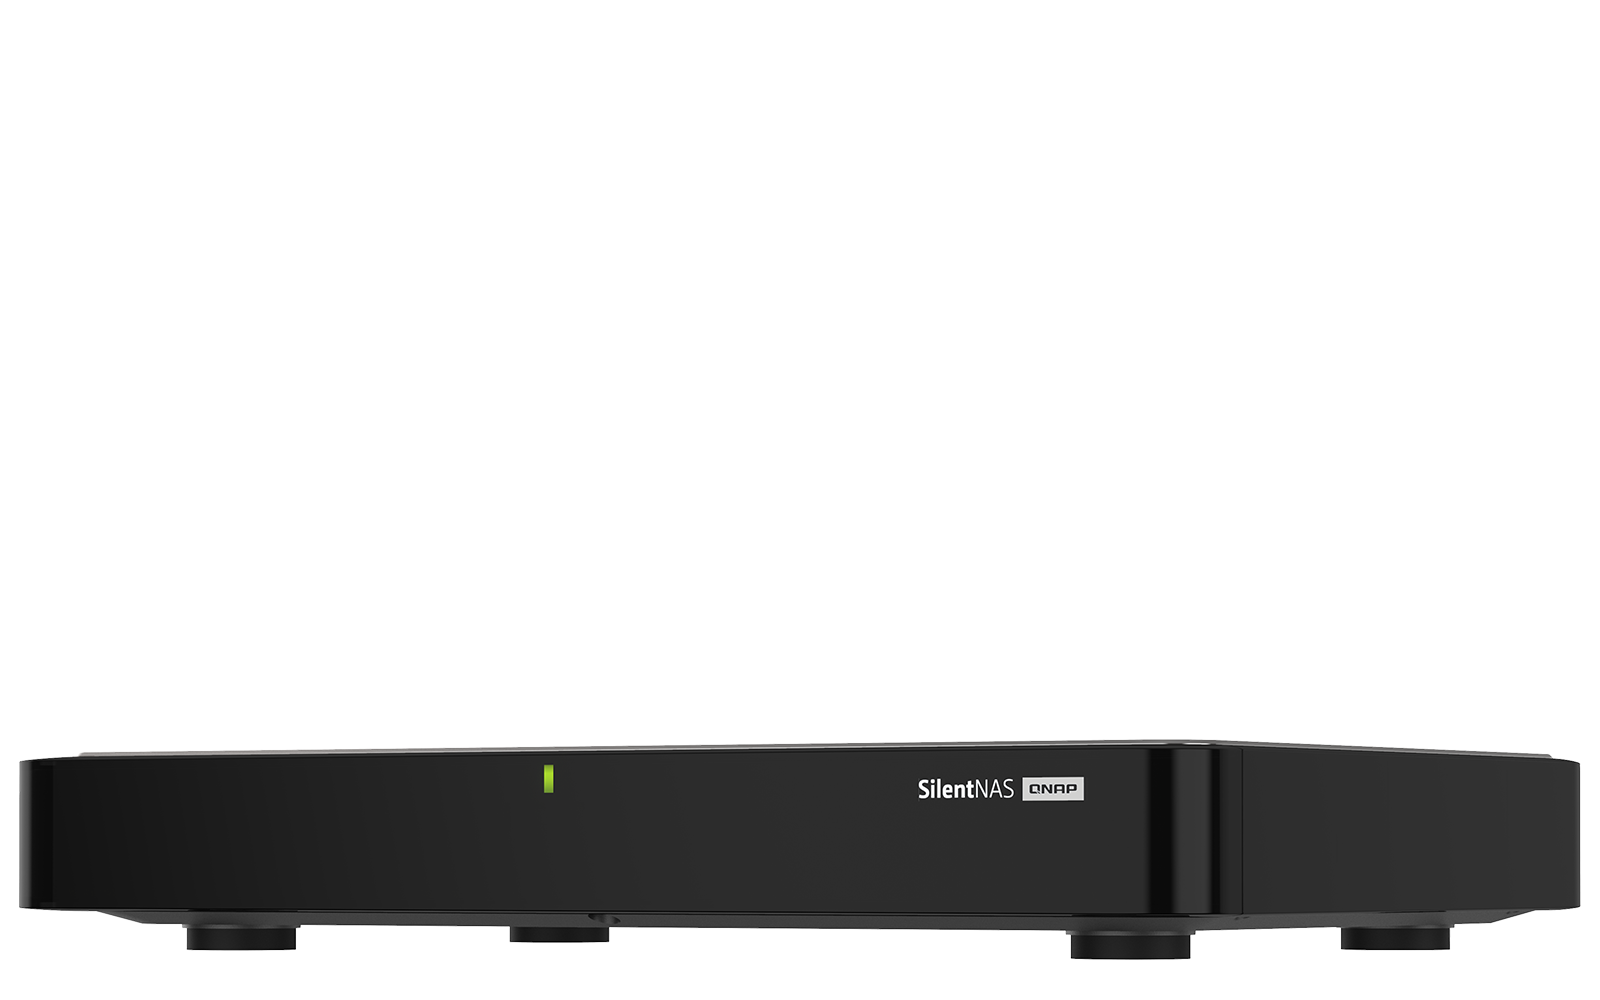 QNAP HS-264-8G Silent and lightweight home NAS for multimedia playback and streaming with dual HDMI 2.0 4K output